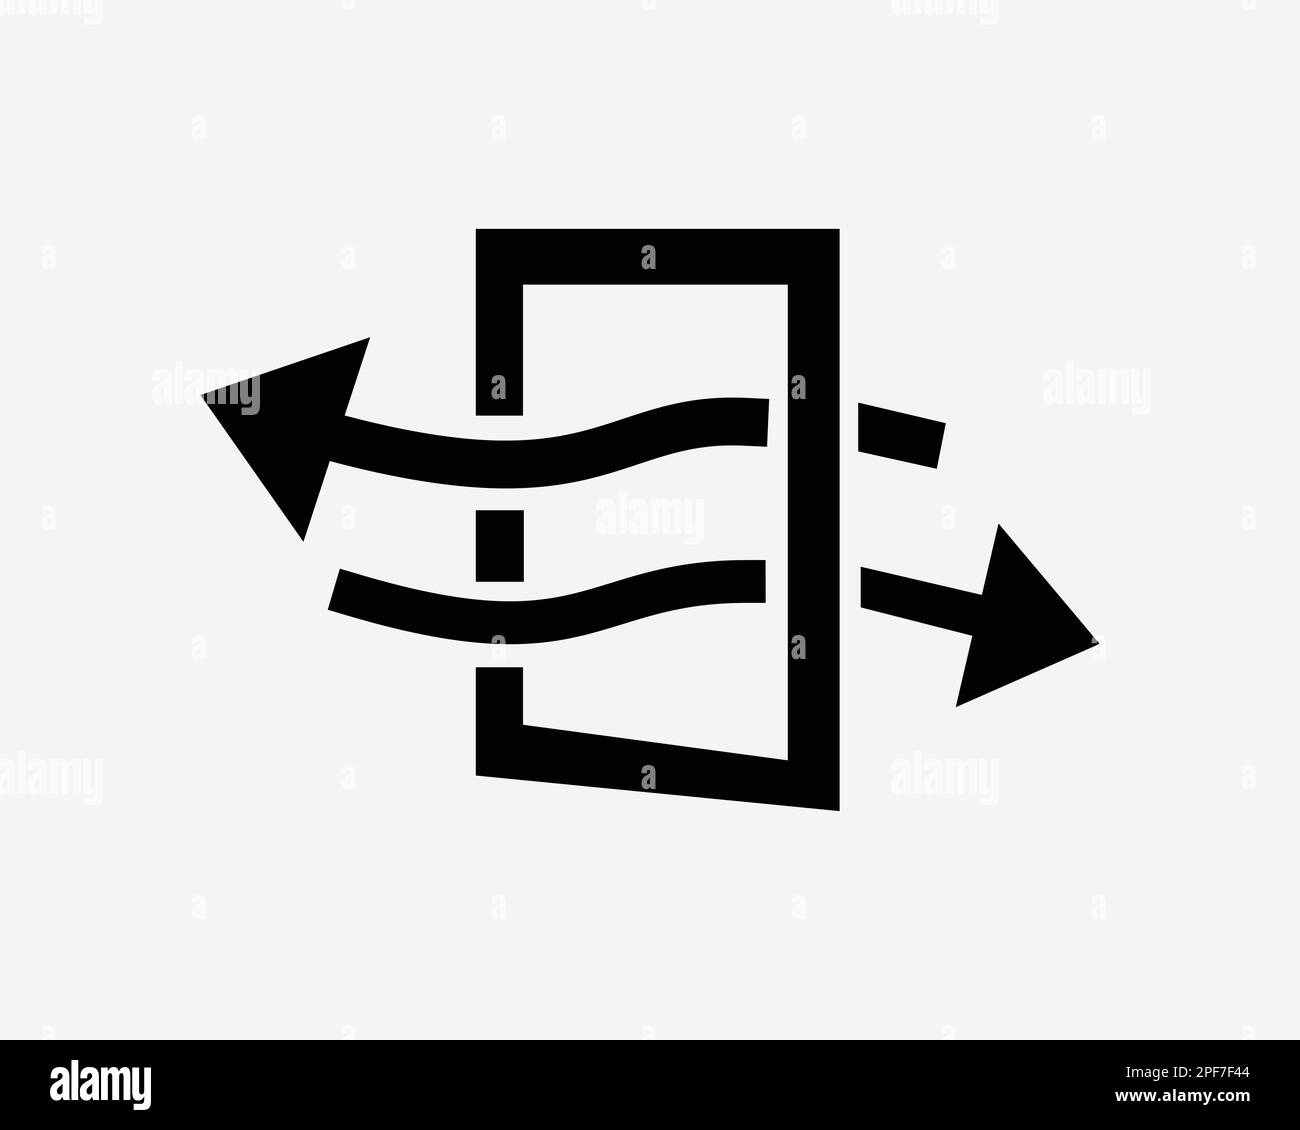 Window Ventilation Opening Ventilate Air Flow Airflow Black White Silhouette Symbol Icon Sign Graphic Clipart Artwork Illustration Pictogram Vector Stock Vector